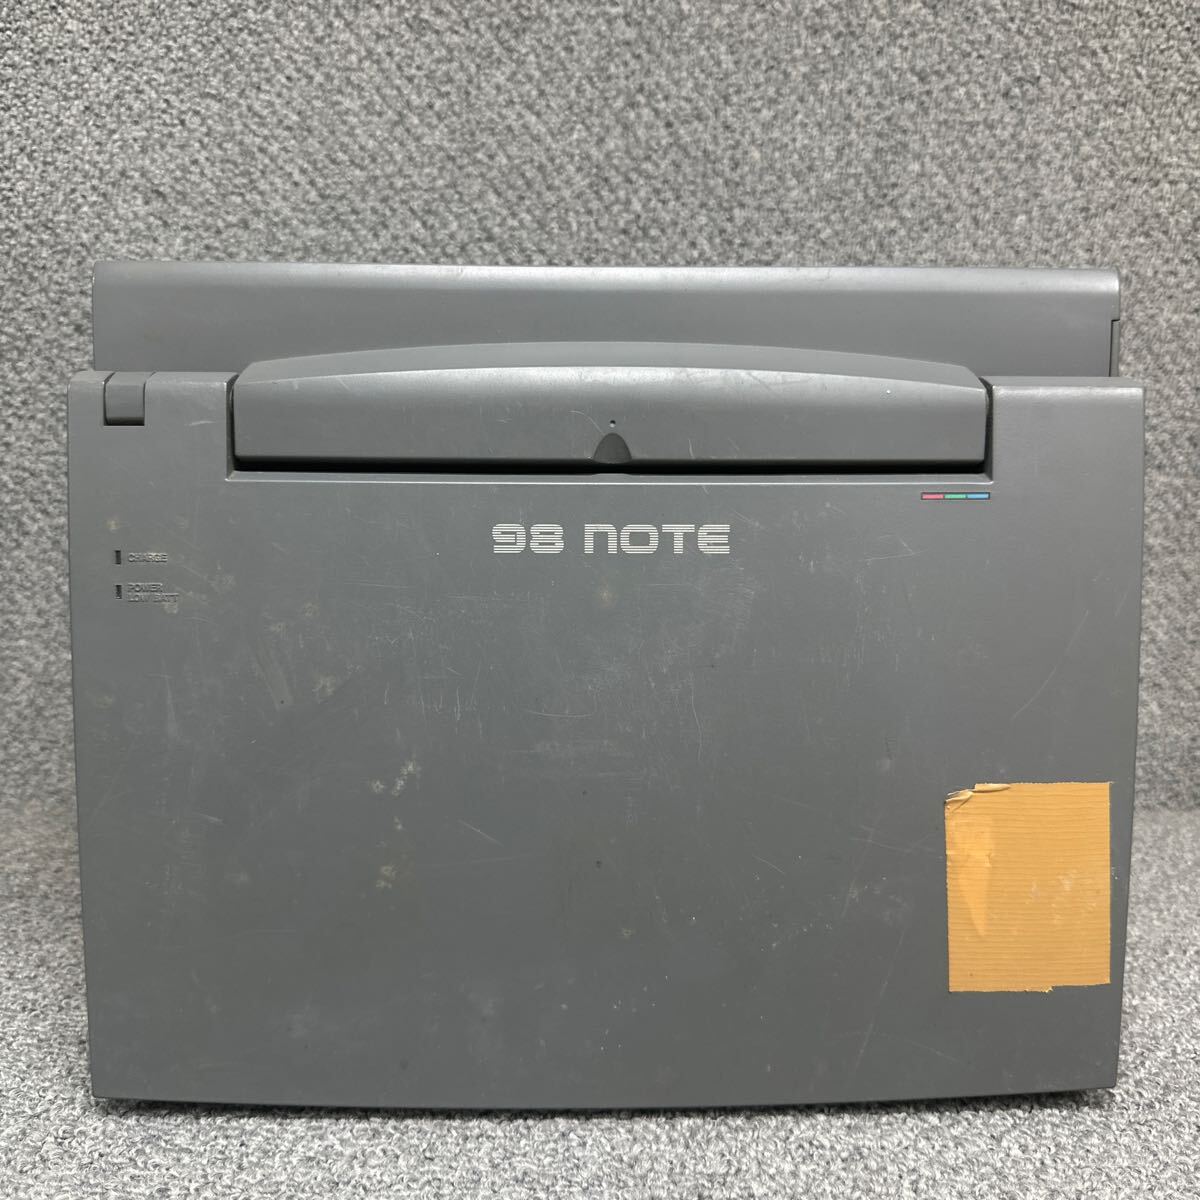 PCN98-1627 super-discount PC98 notebook NEC PC-9821Ne2 electrification un- possible Junk including in a package possibility 